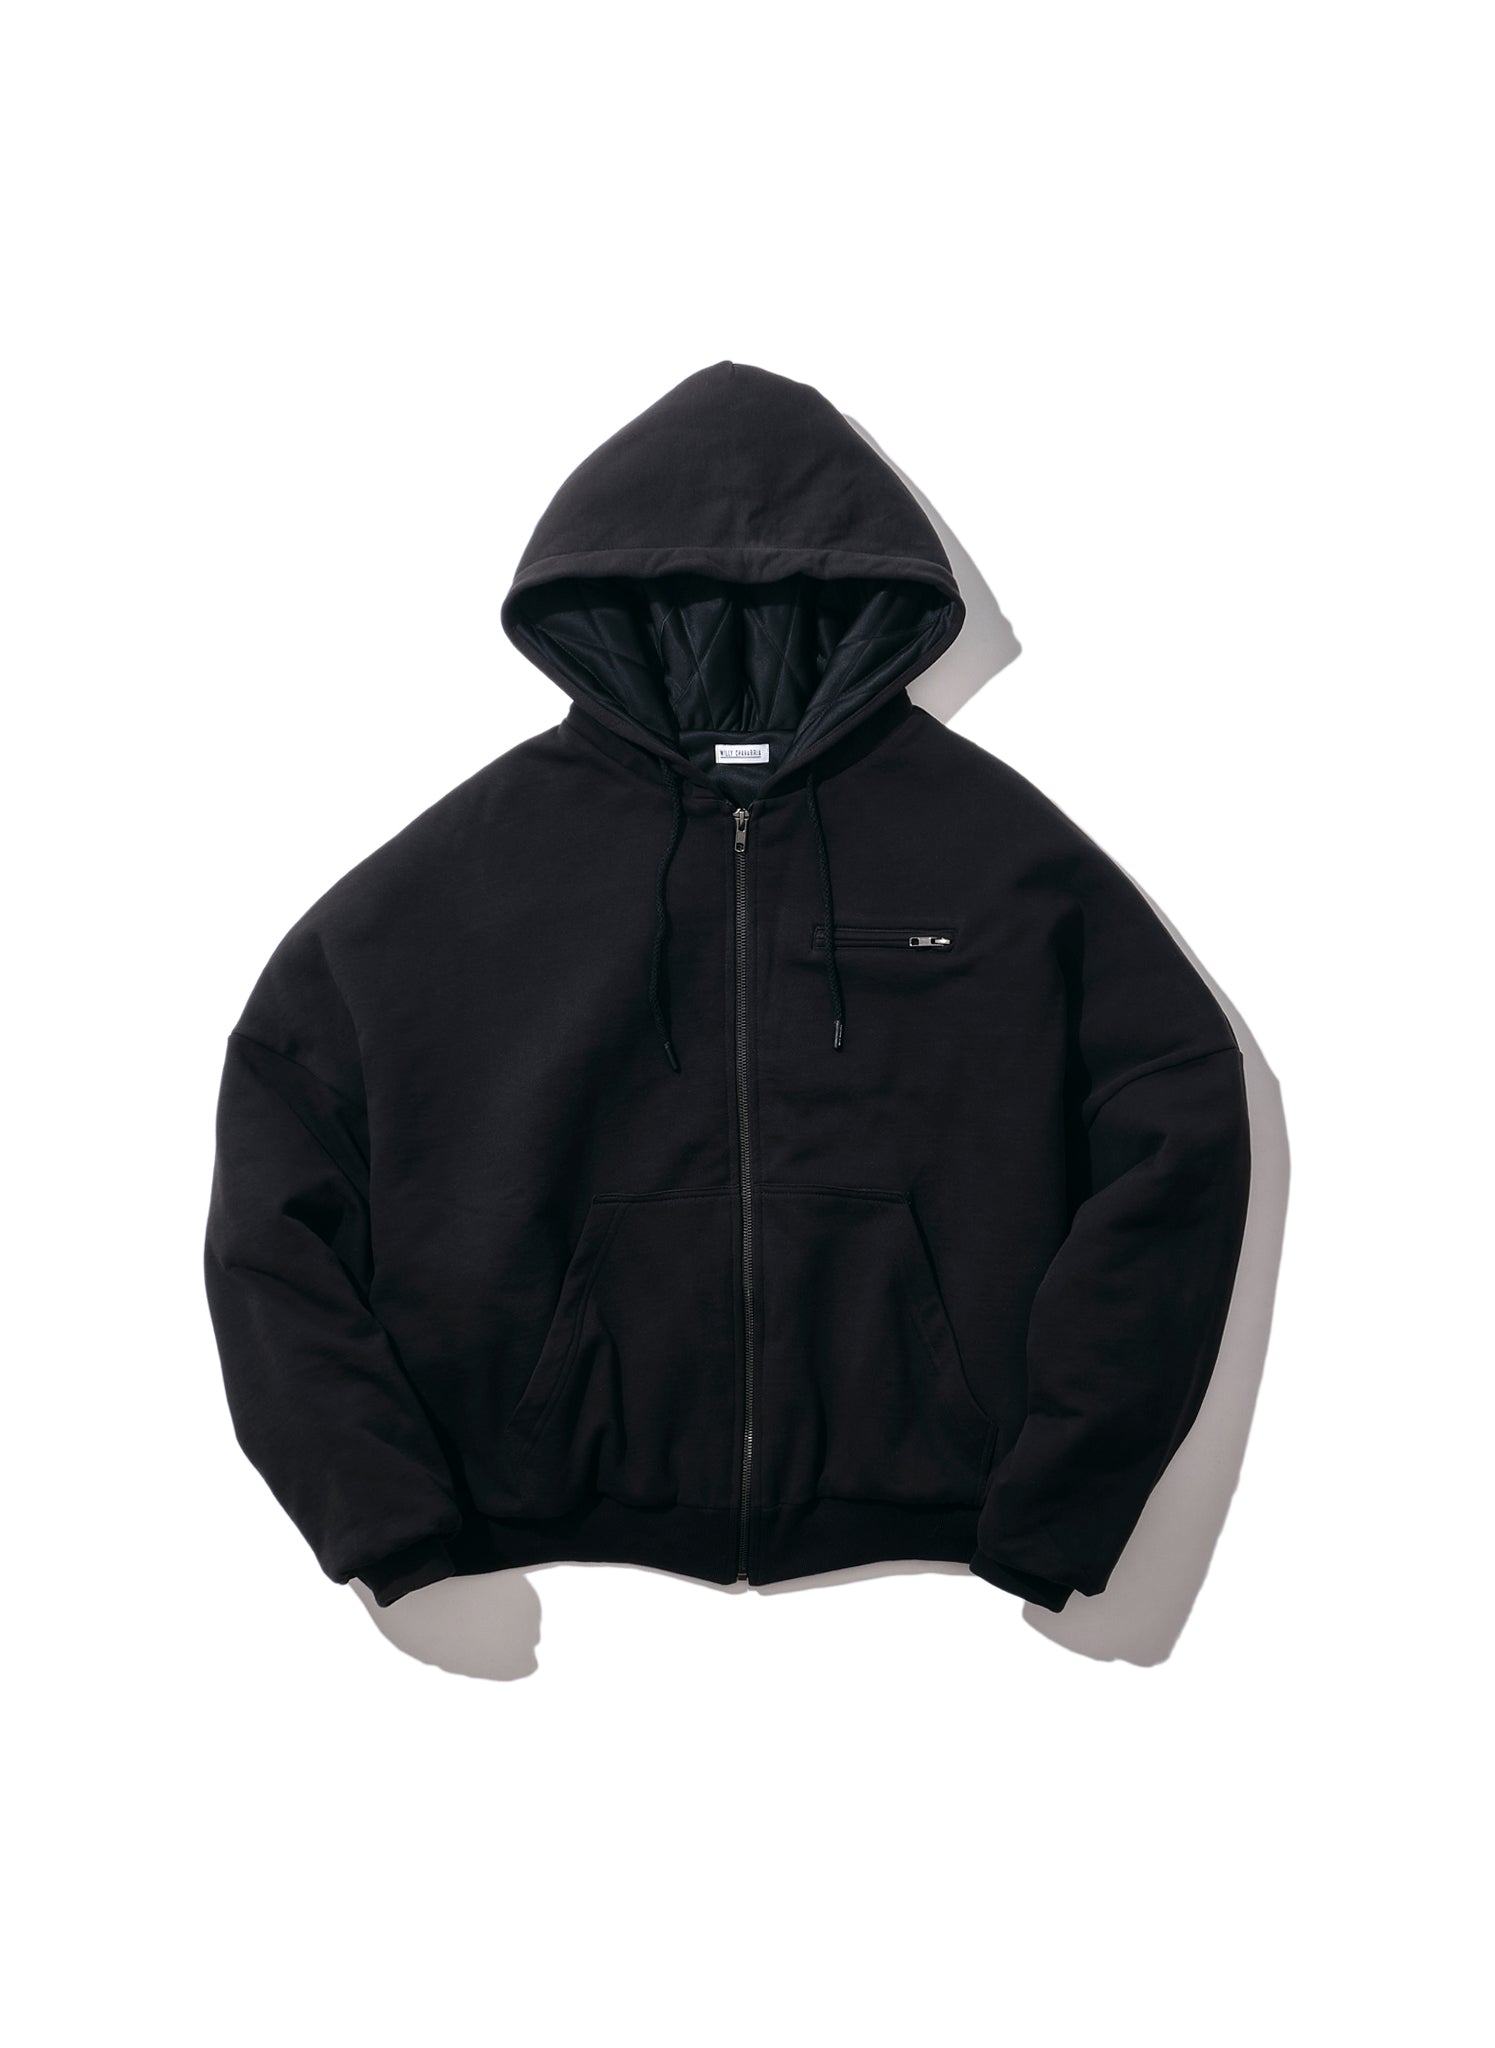 Willy chavarria zip up hoodie - 5